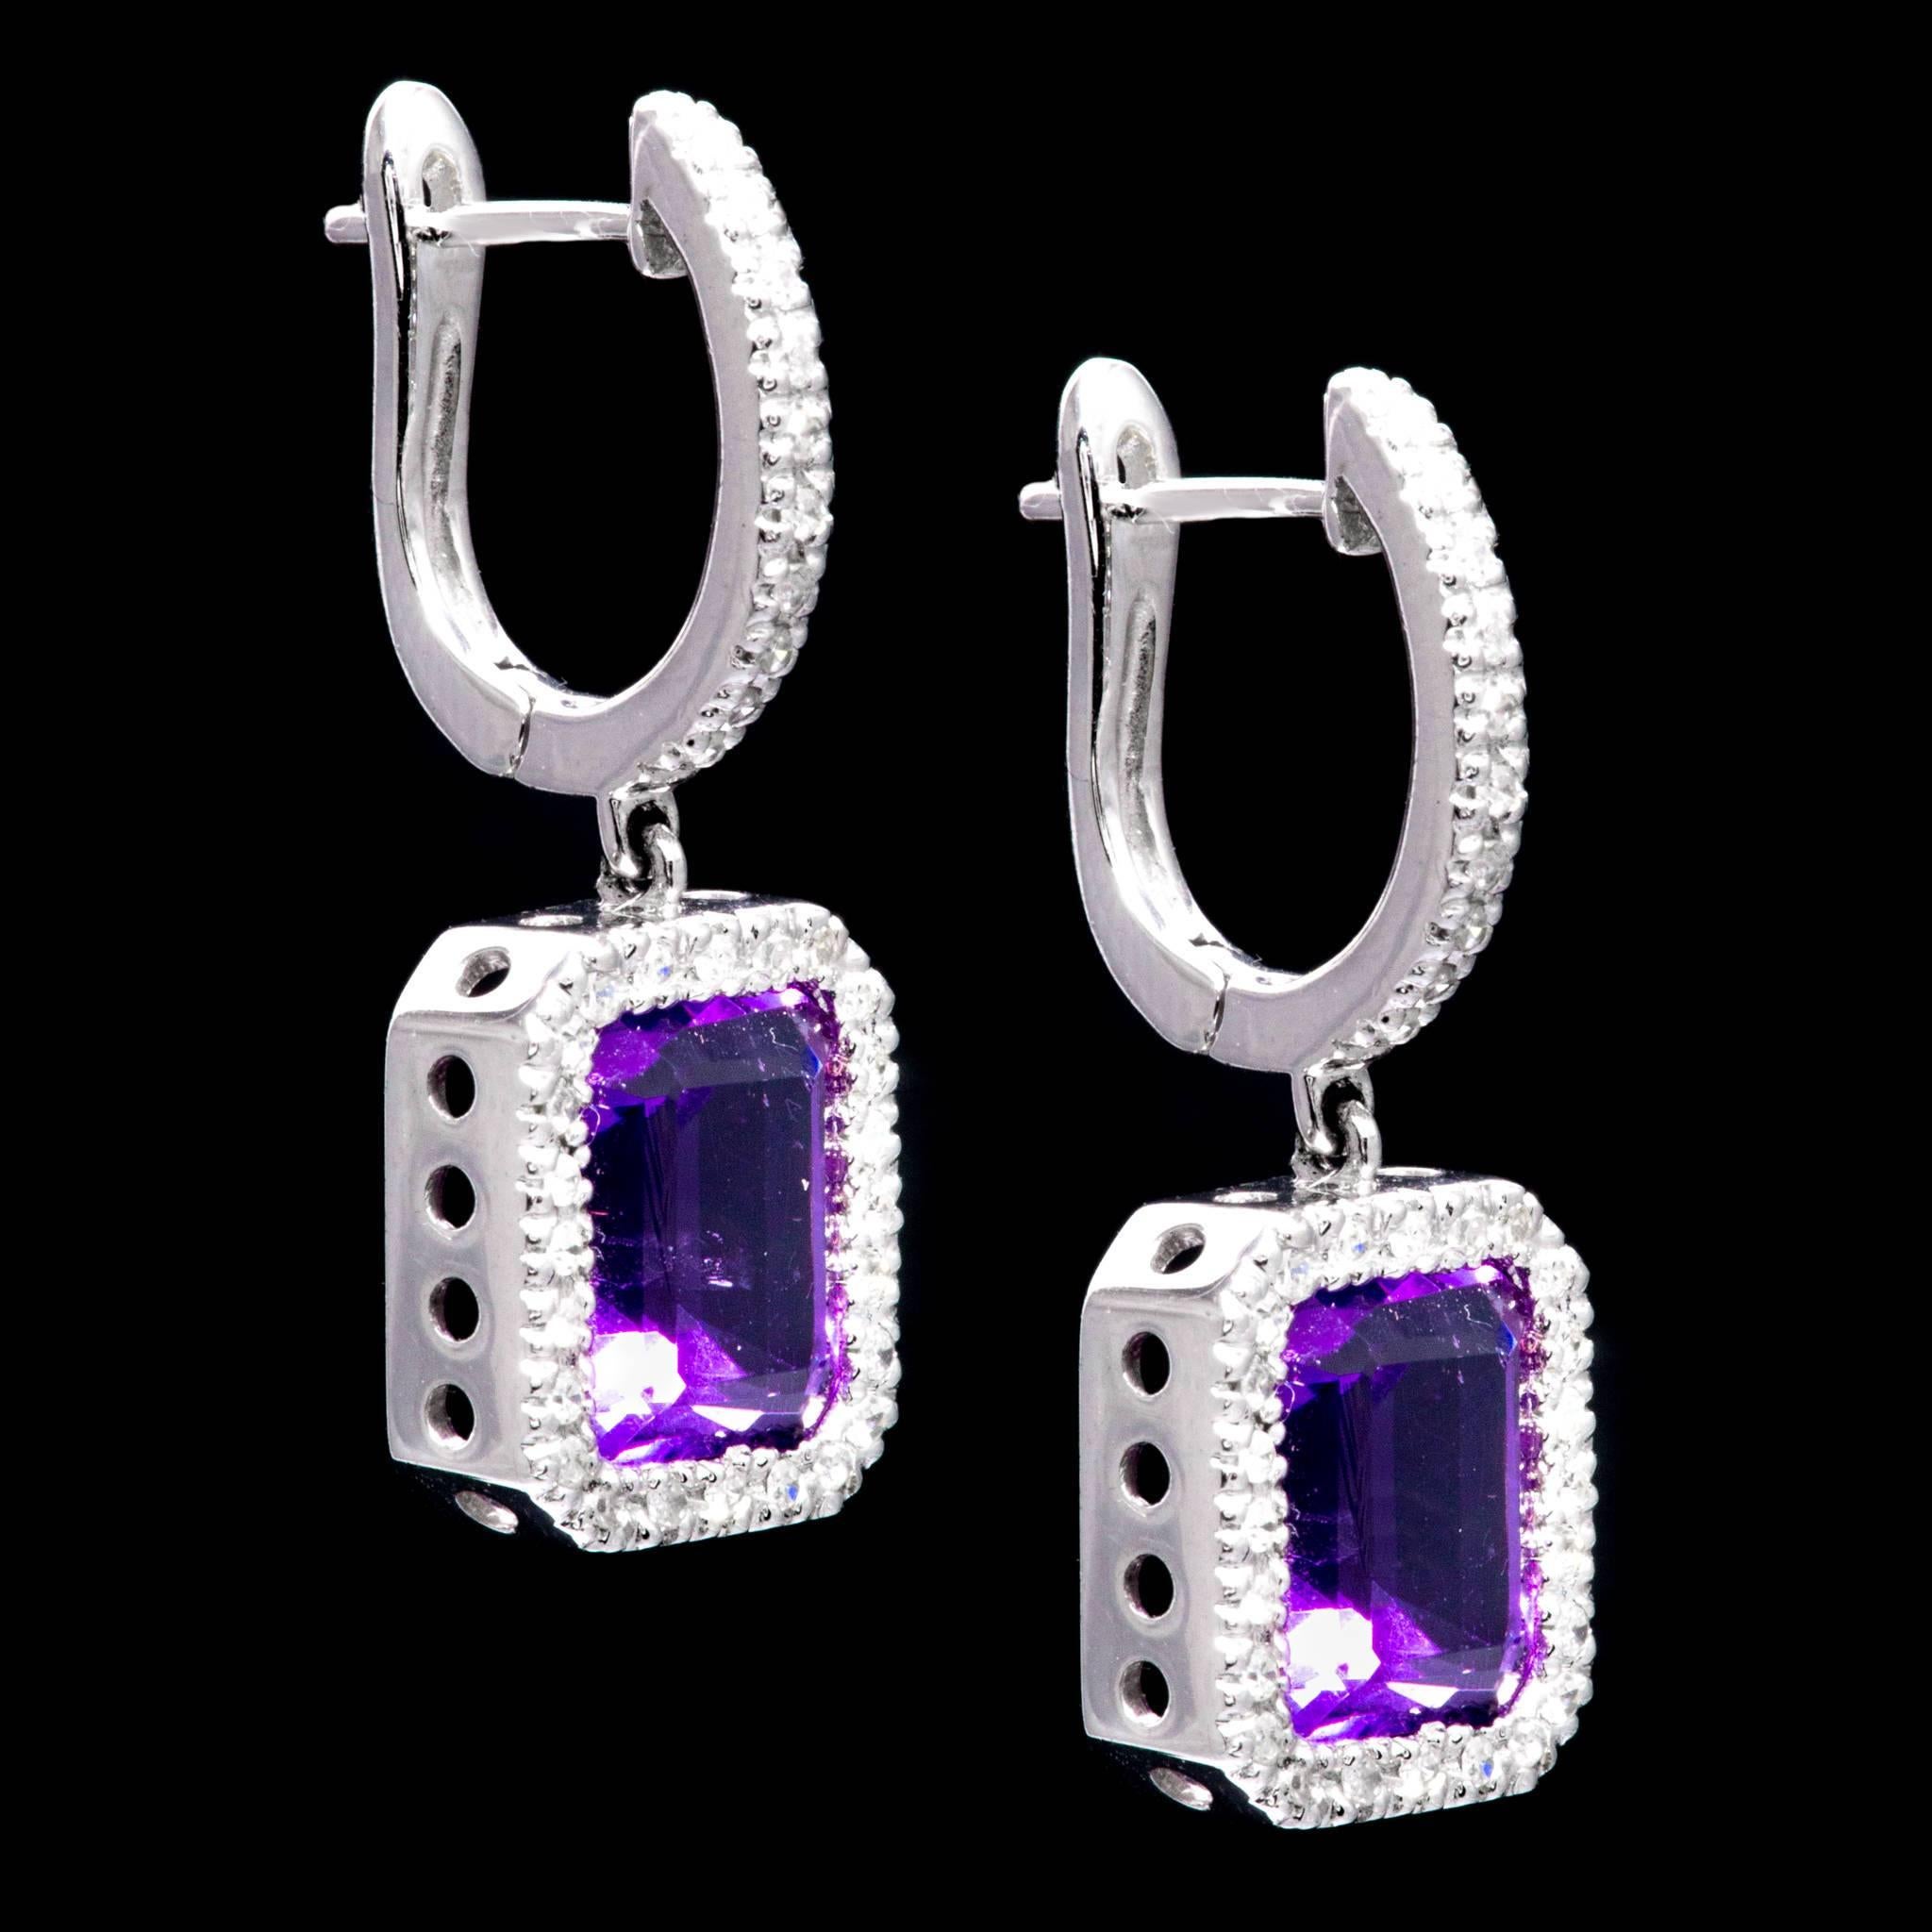 Beacon Hill Jewelers Presents:

A beautiful pair of dangling amethyst, and diamond earrings in 14 karat white gold. Each earring is centered by a 2 carat rich vivid purple amethyst framed by sparkling pave set diamonds.

Grading as VVS clarity the